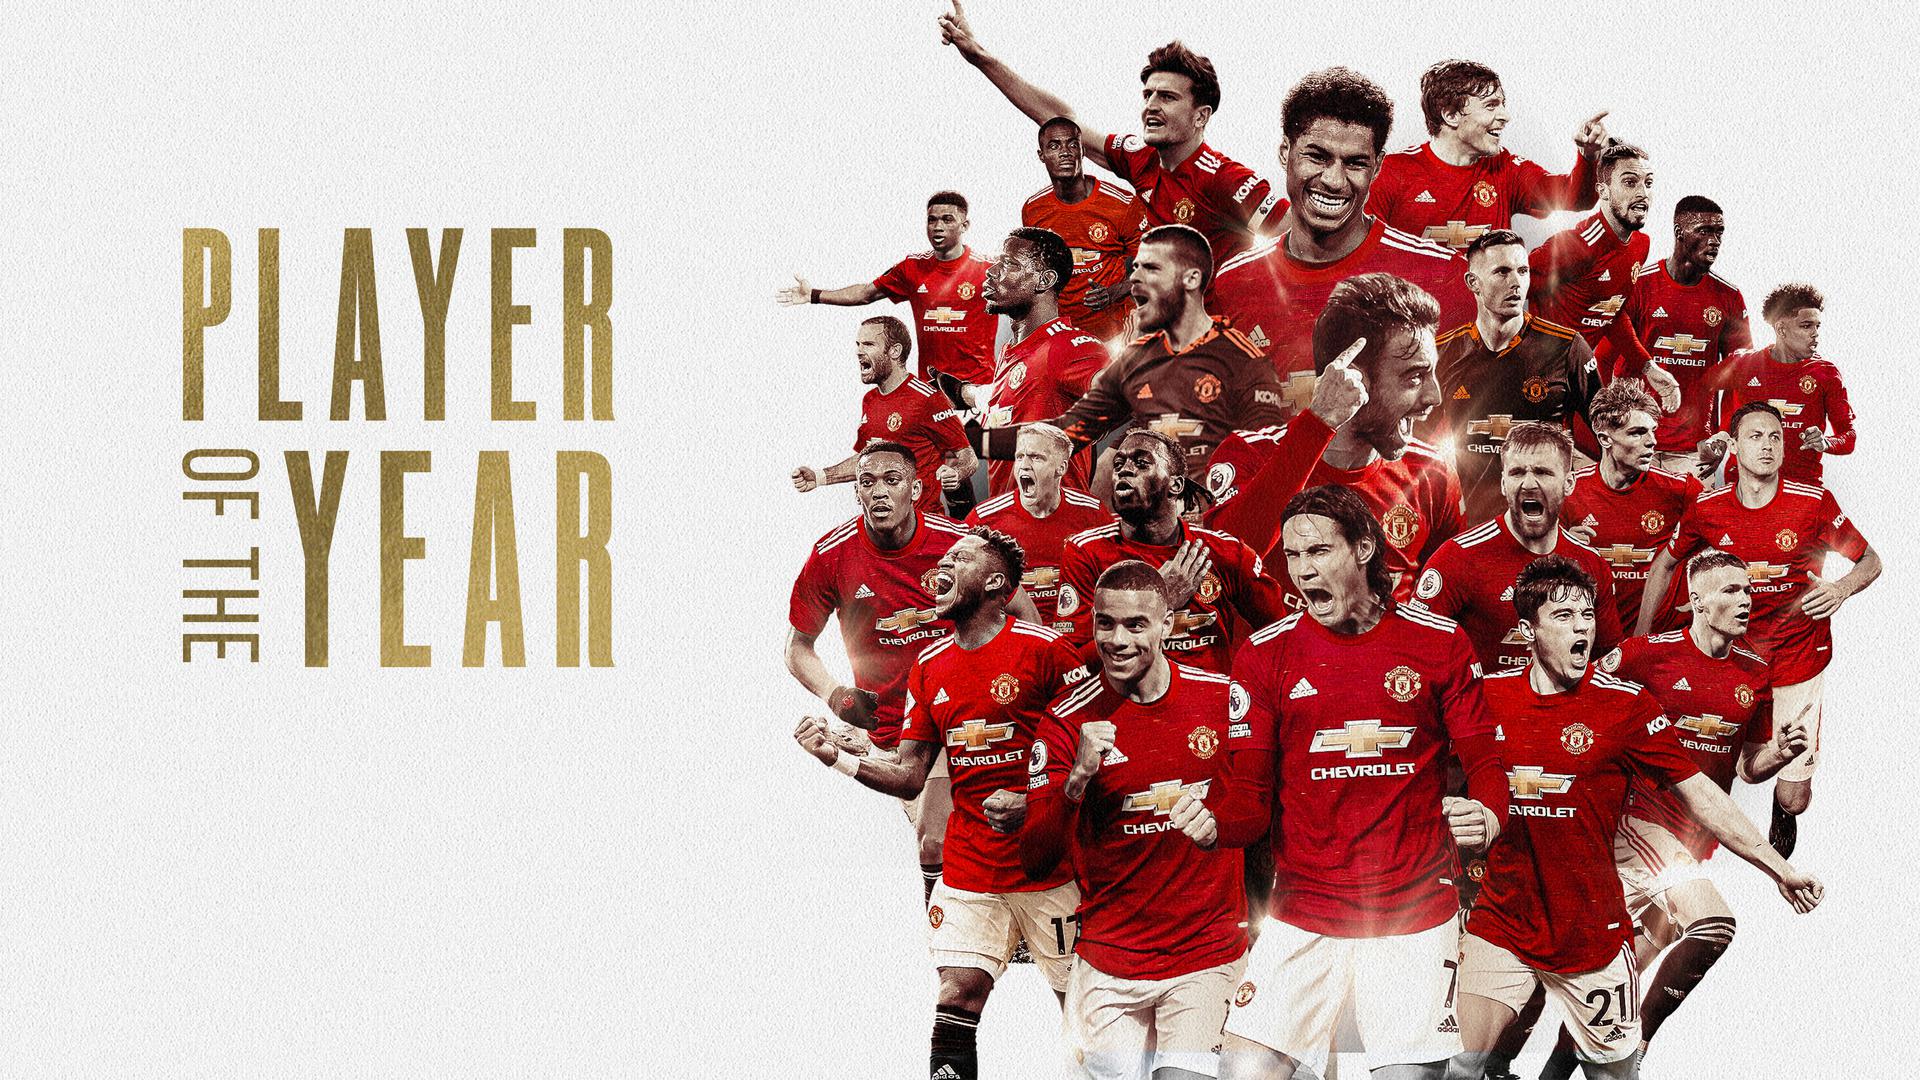 View Man United Players Wallpaper 2021 Pictures